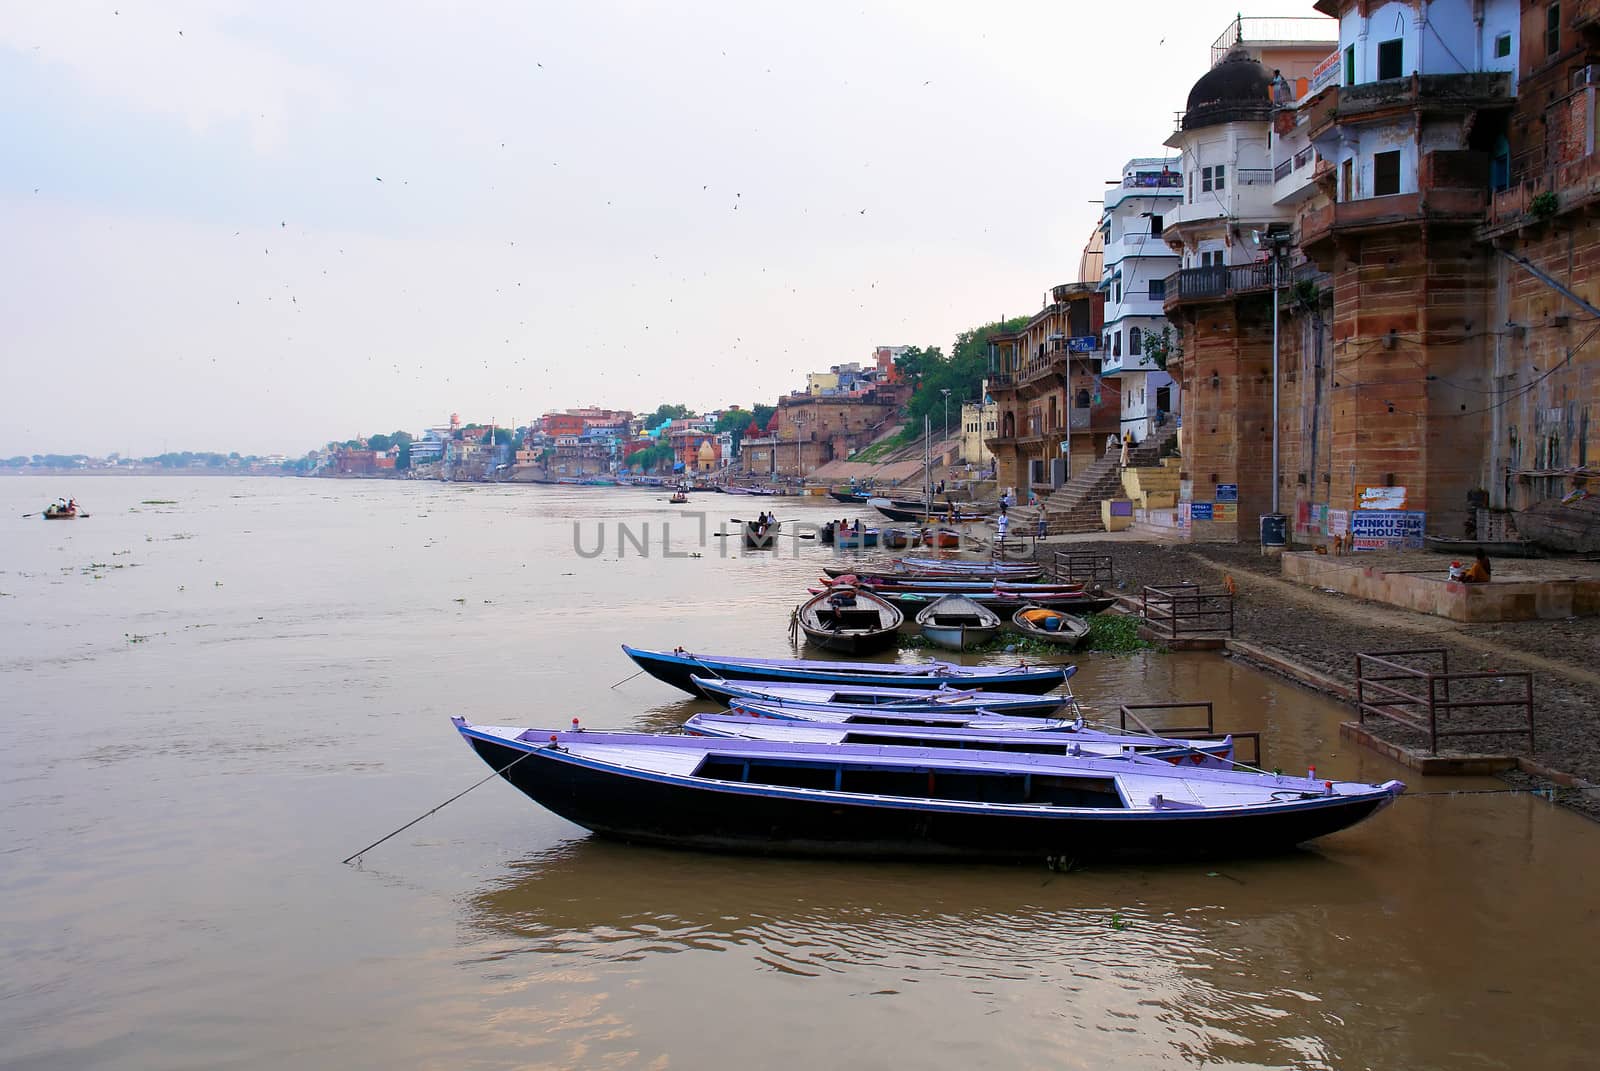 Boats on Ganges holy river in Varanasi, India